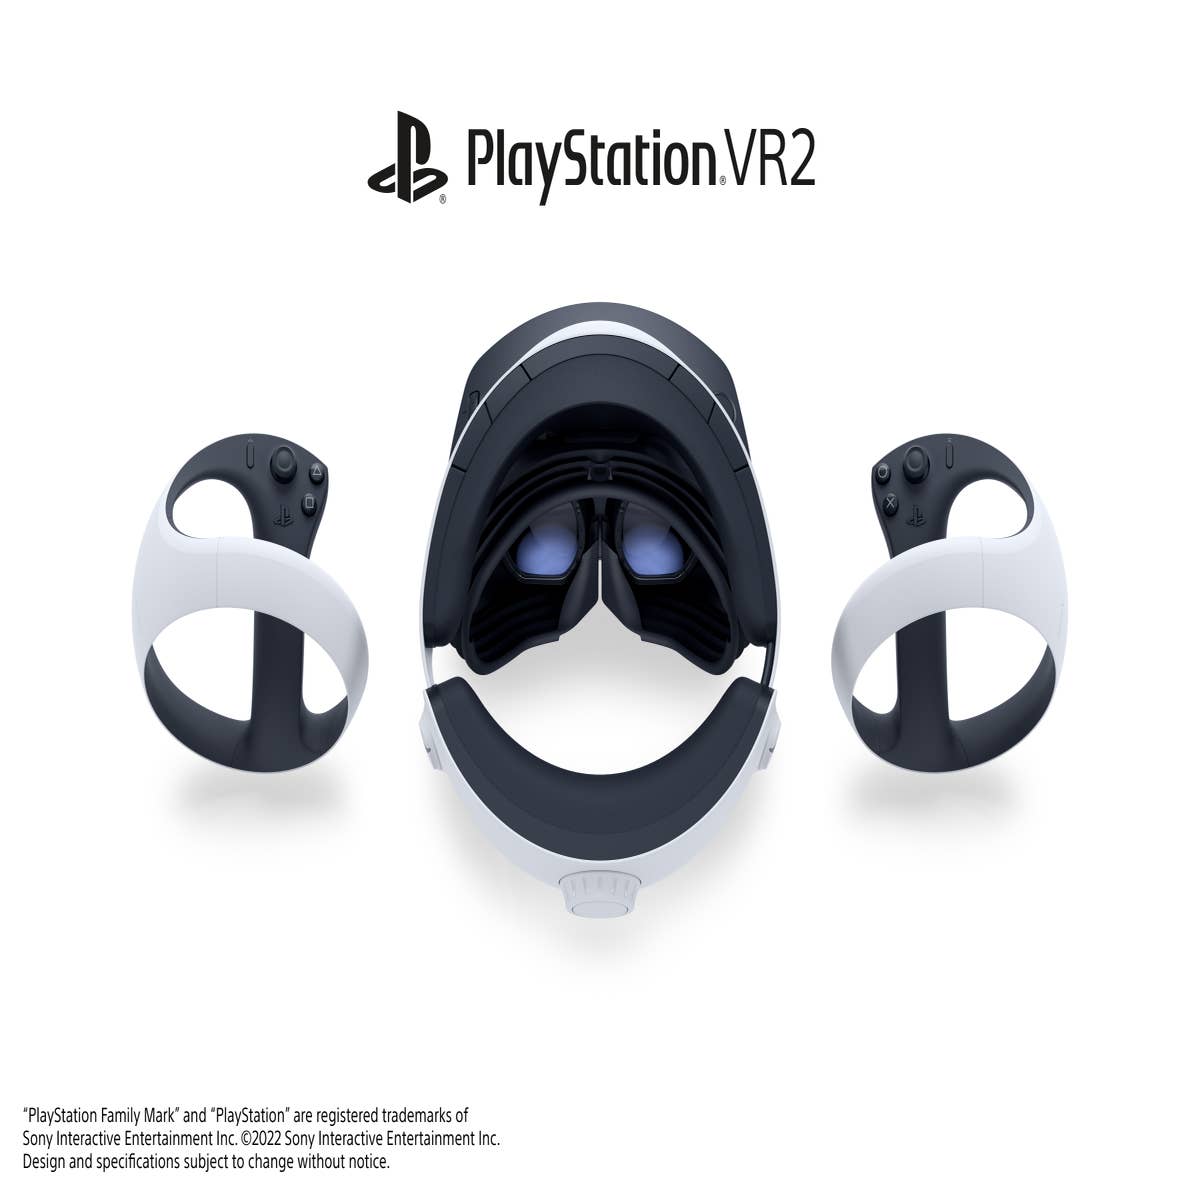 PlayStation VR 2 (PSVR 2) review: it's so good, but…